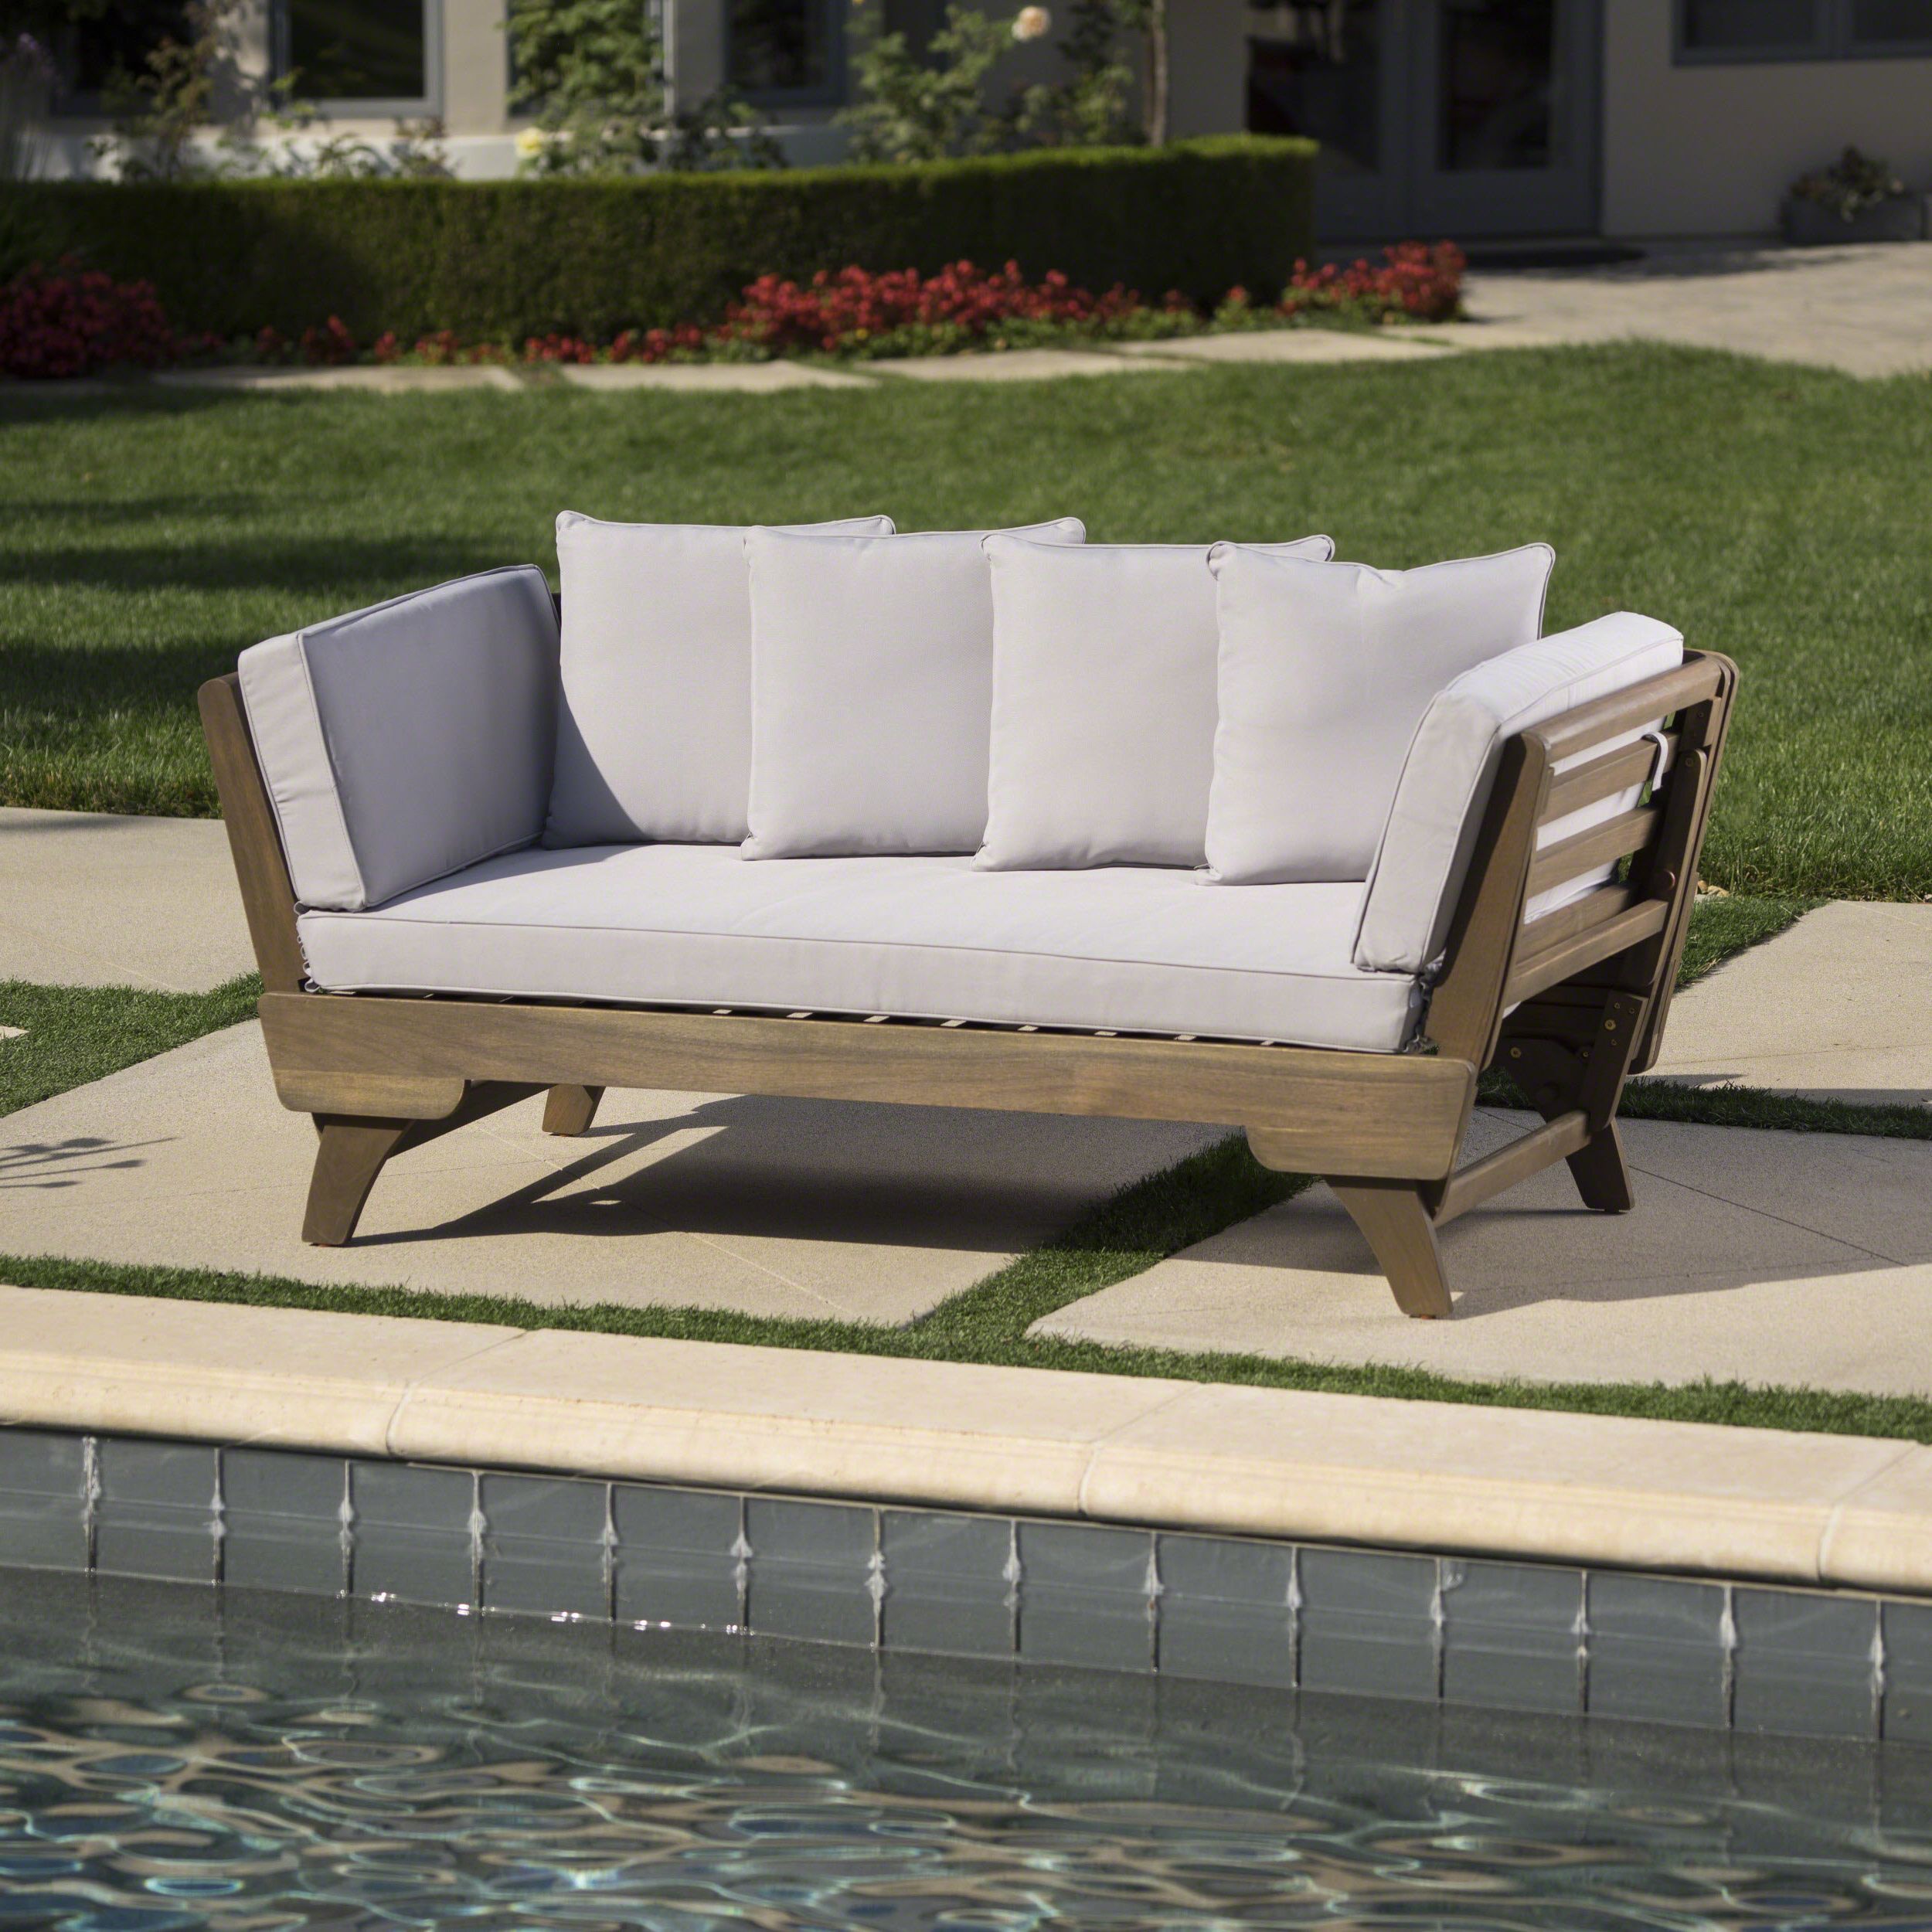 Ellanti Teak Patio Daybed With Cushions For Best And Newest Ellanti Teak Patio Daybeds With Cushions (View 1 of 20)